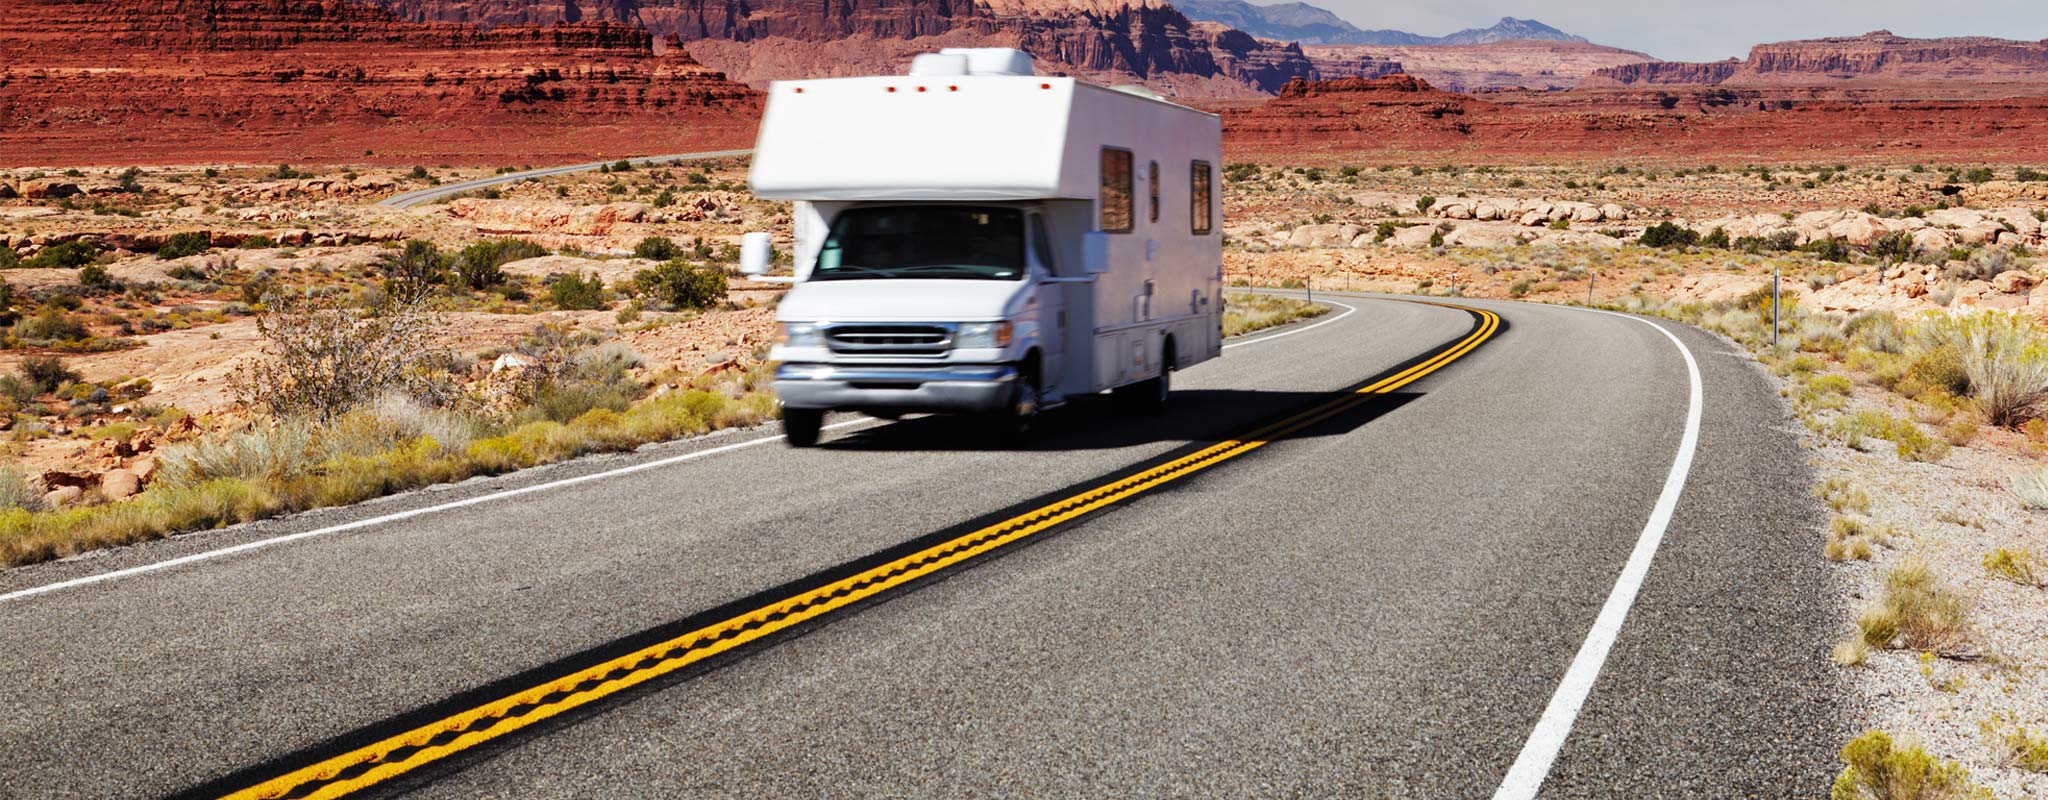 Motorhome driving near Monument Valley